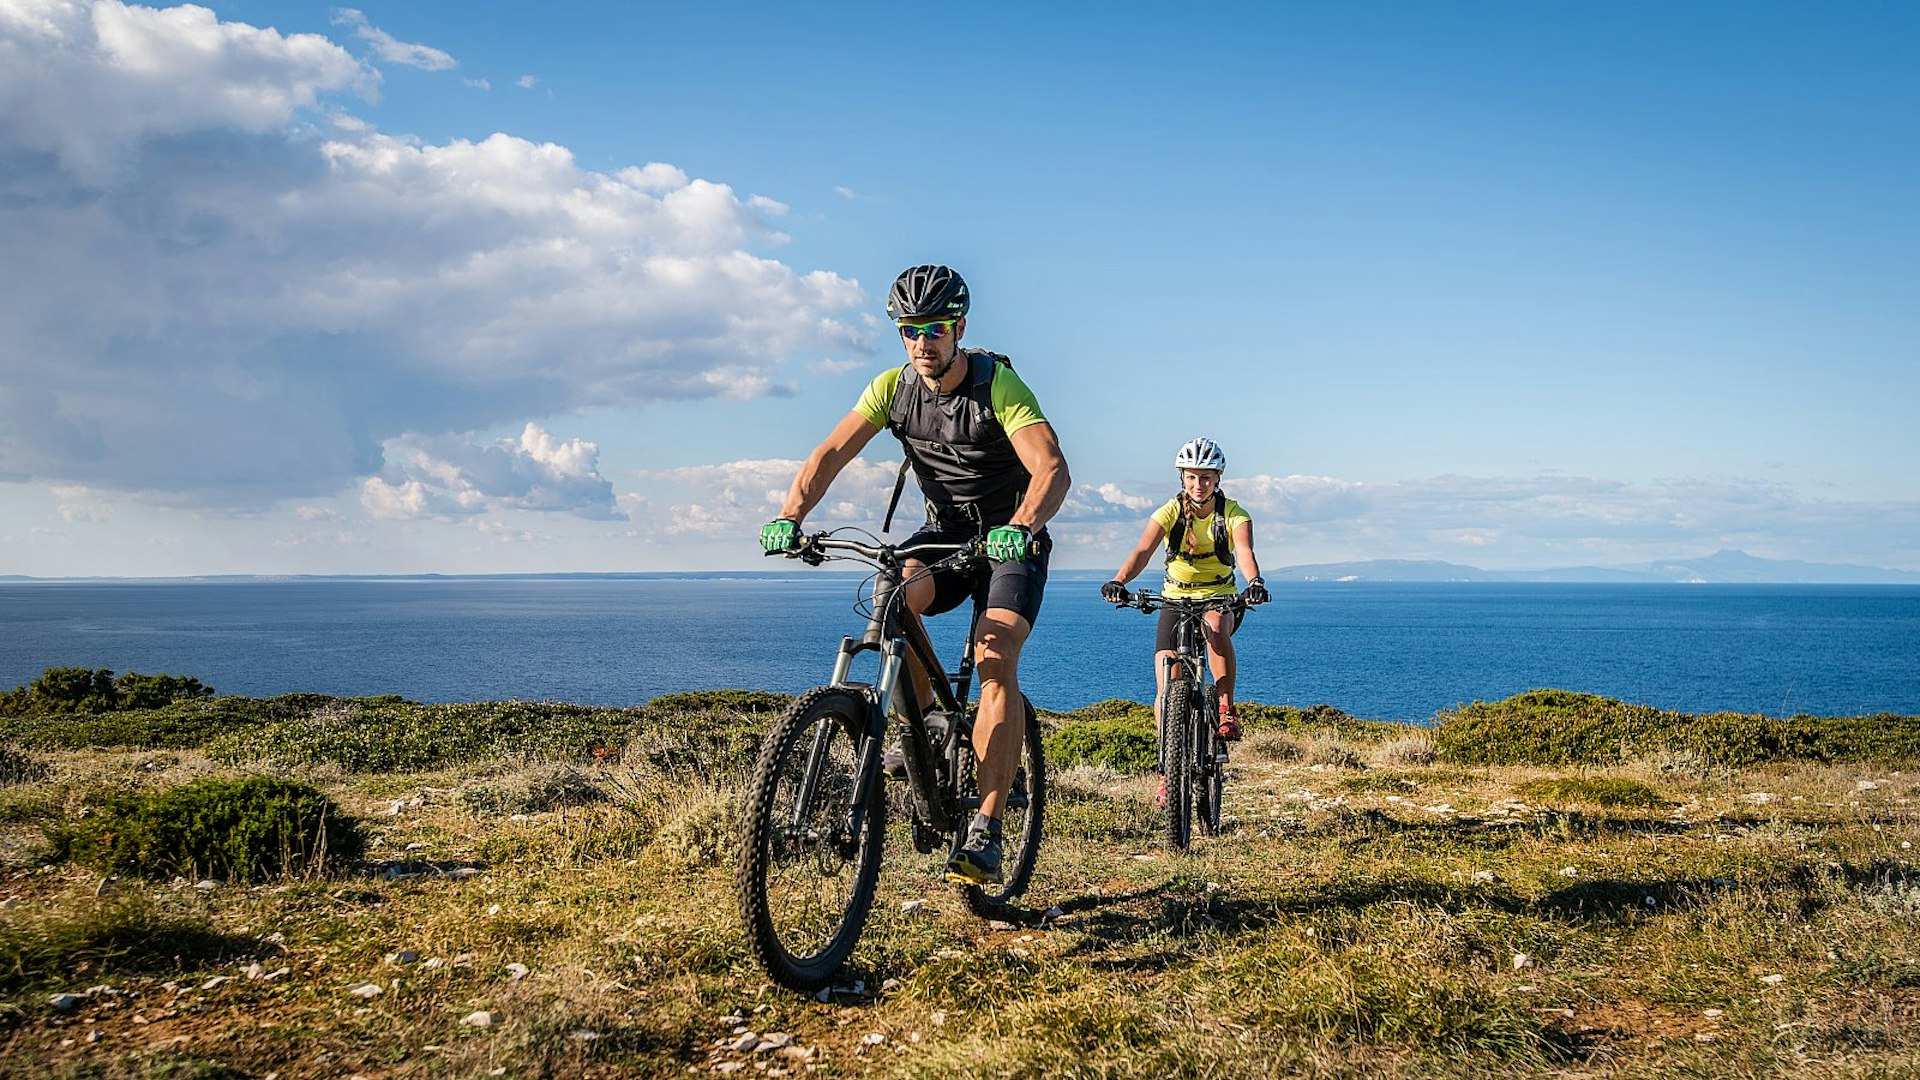 A few EuroVelo routes take in Croatia: here we see a young couple on mountain bikes cycling along a grassy headland, with the blue sea beyond.